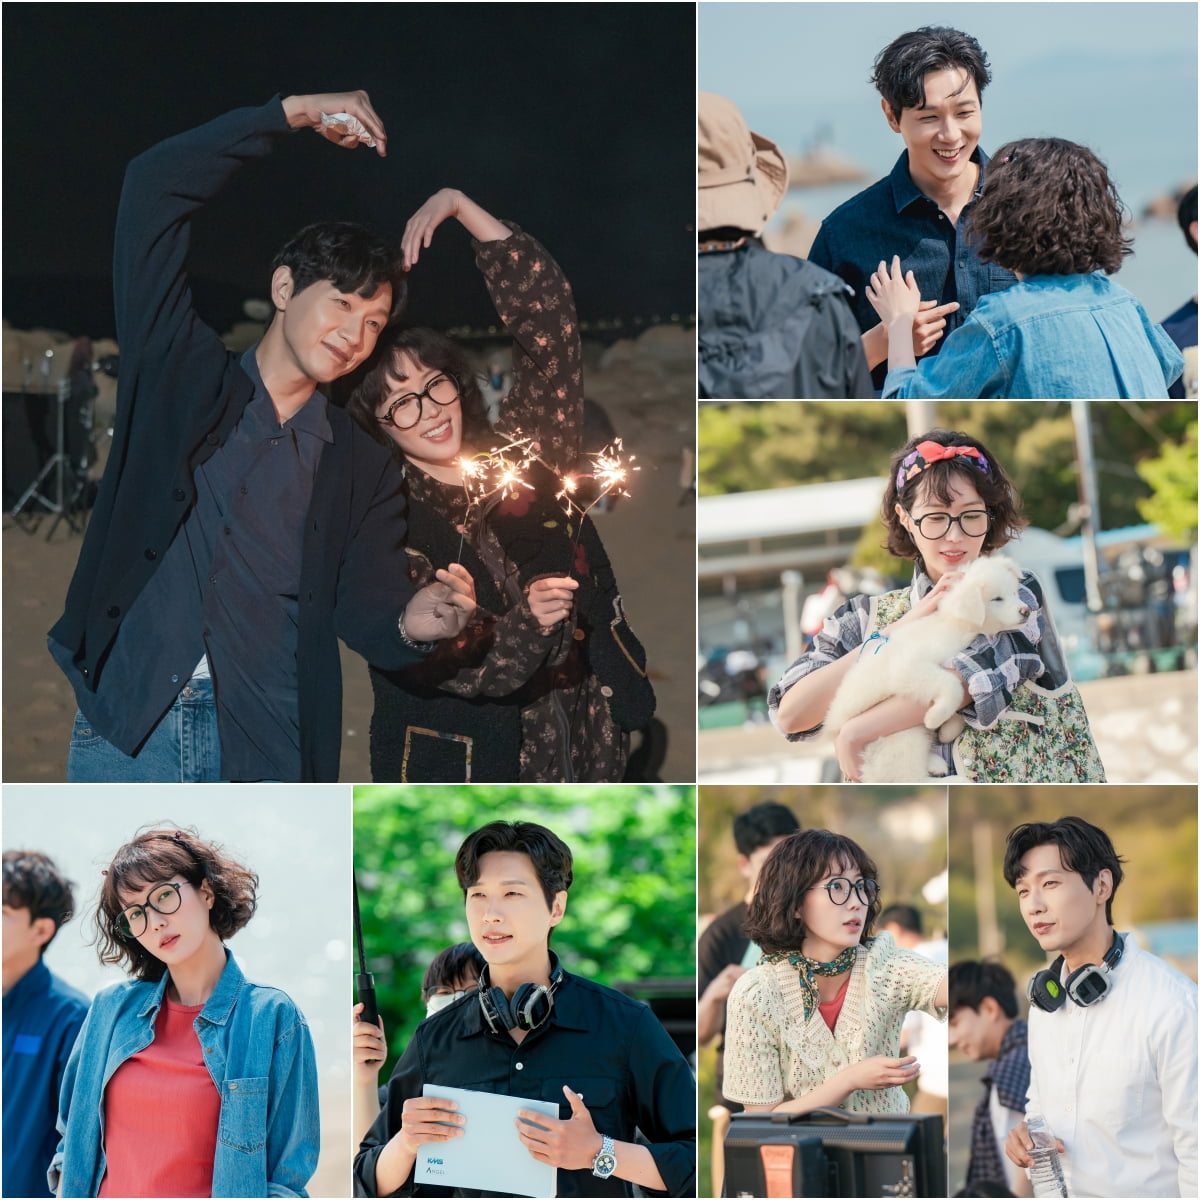 ‘Beauty and the Pure Man’ highest viewership rating of 21.8%